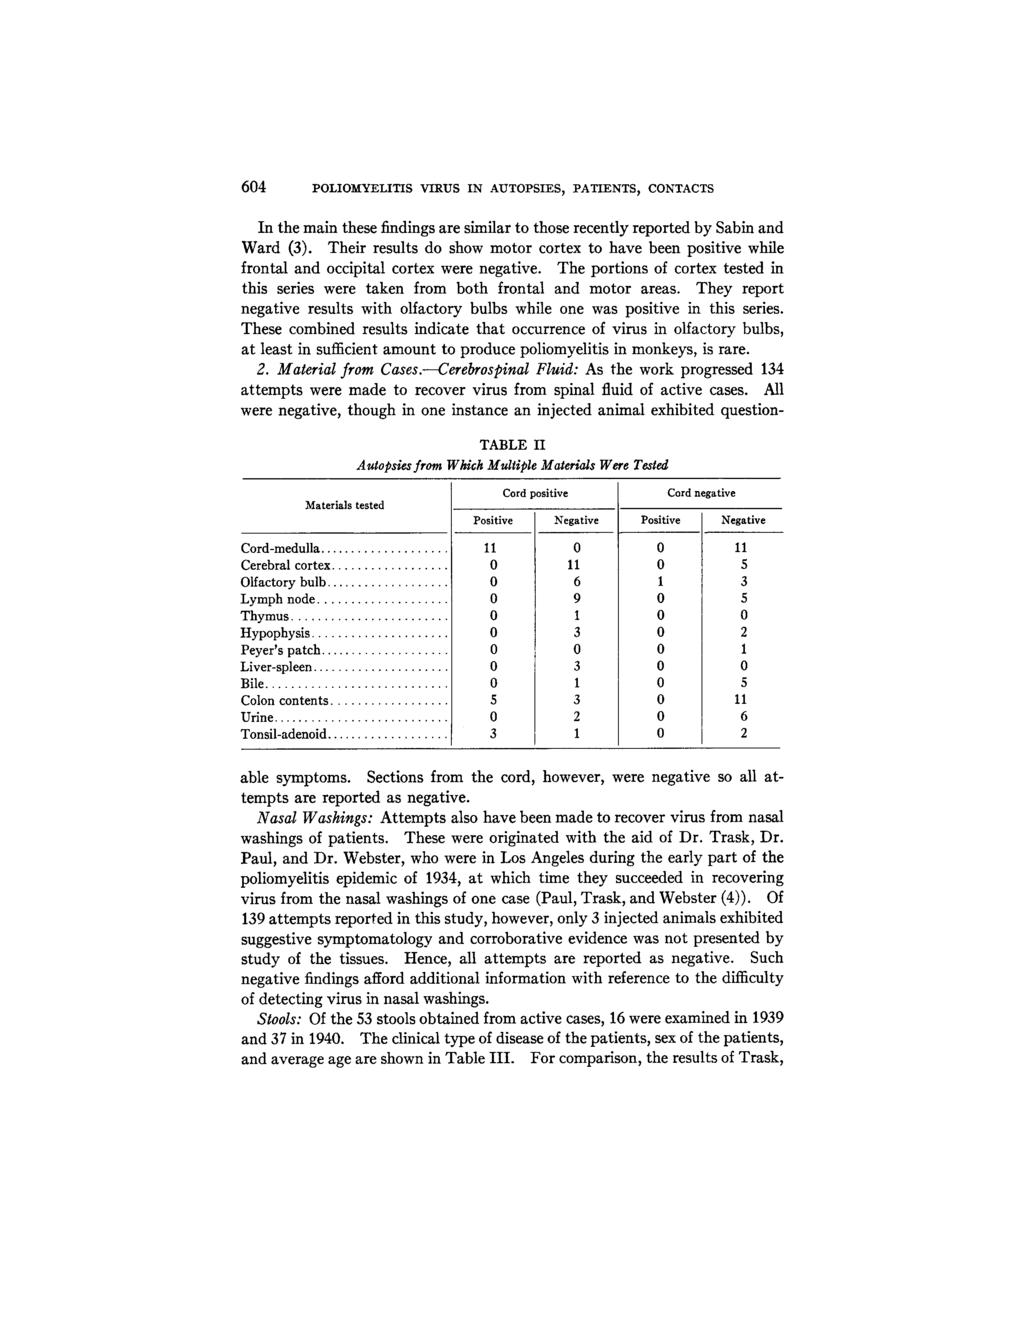 64 POLIOMYELITIS VIRUS IN AUTOPSIES, PATIENTS, CONTACTS In the main these findings are similar to those recently reported by Sabin and Ward (3).